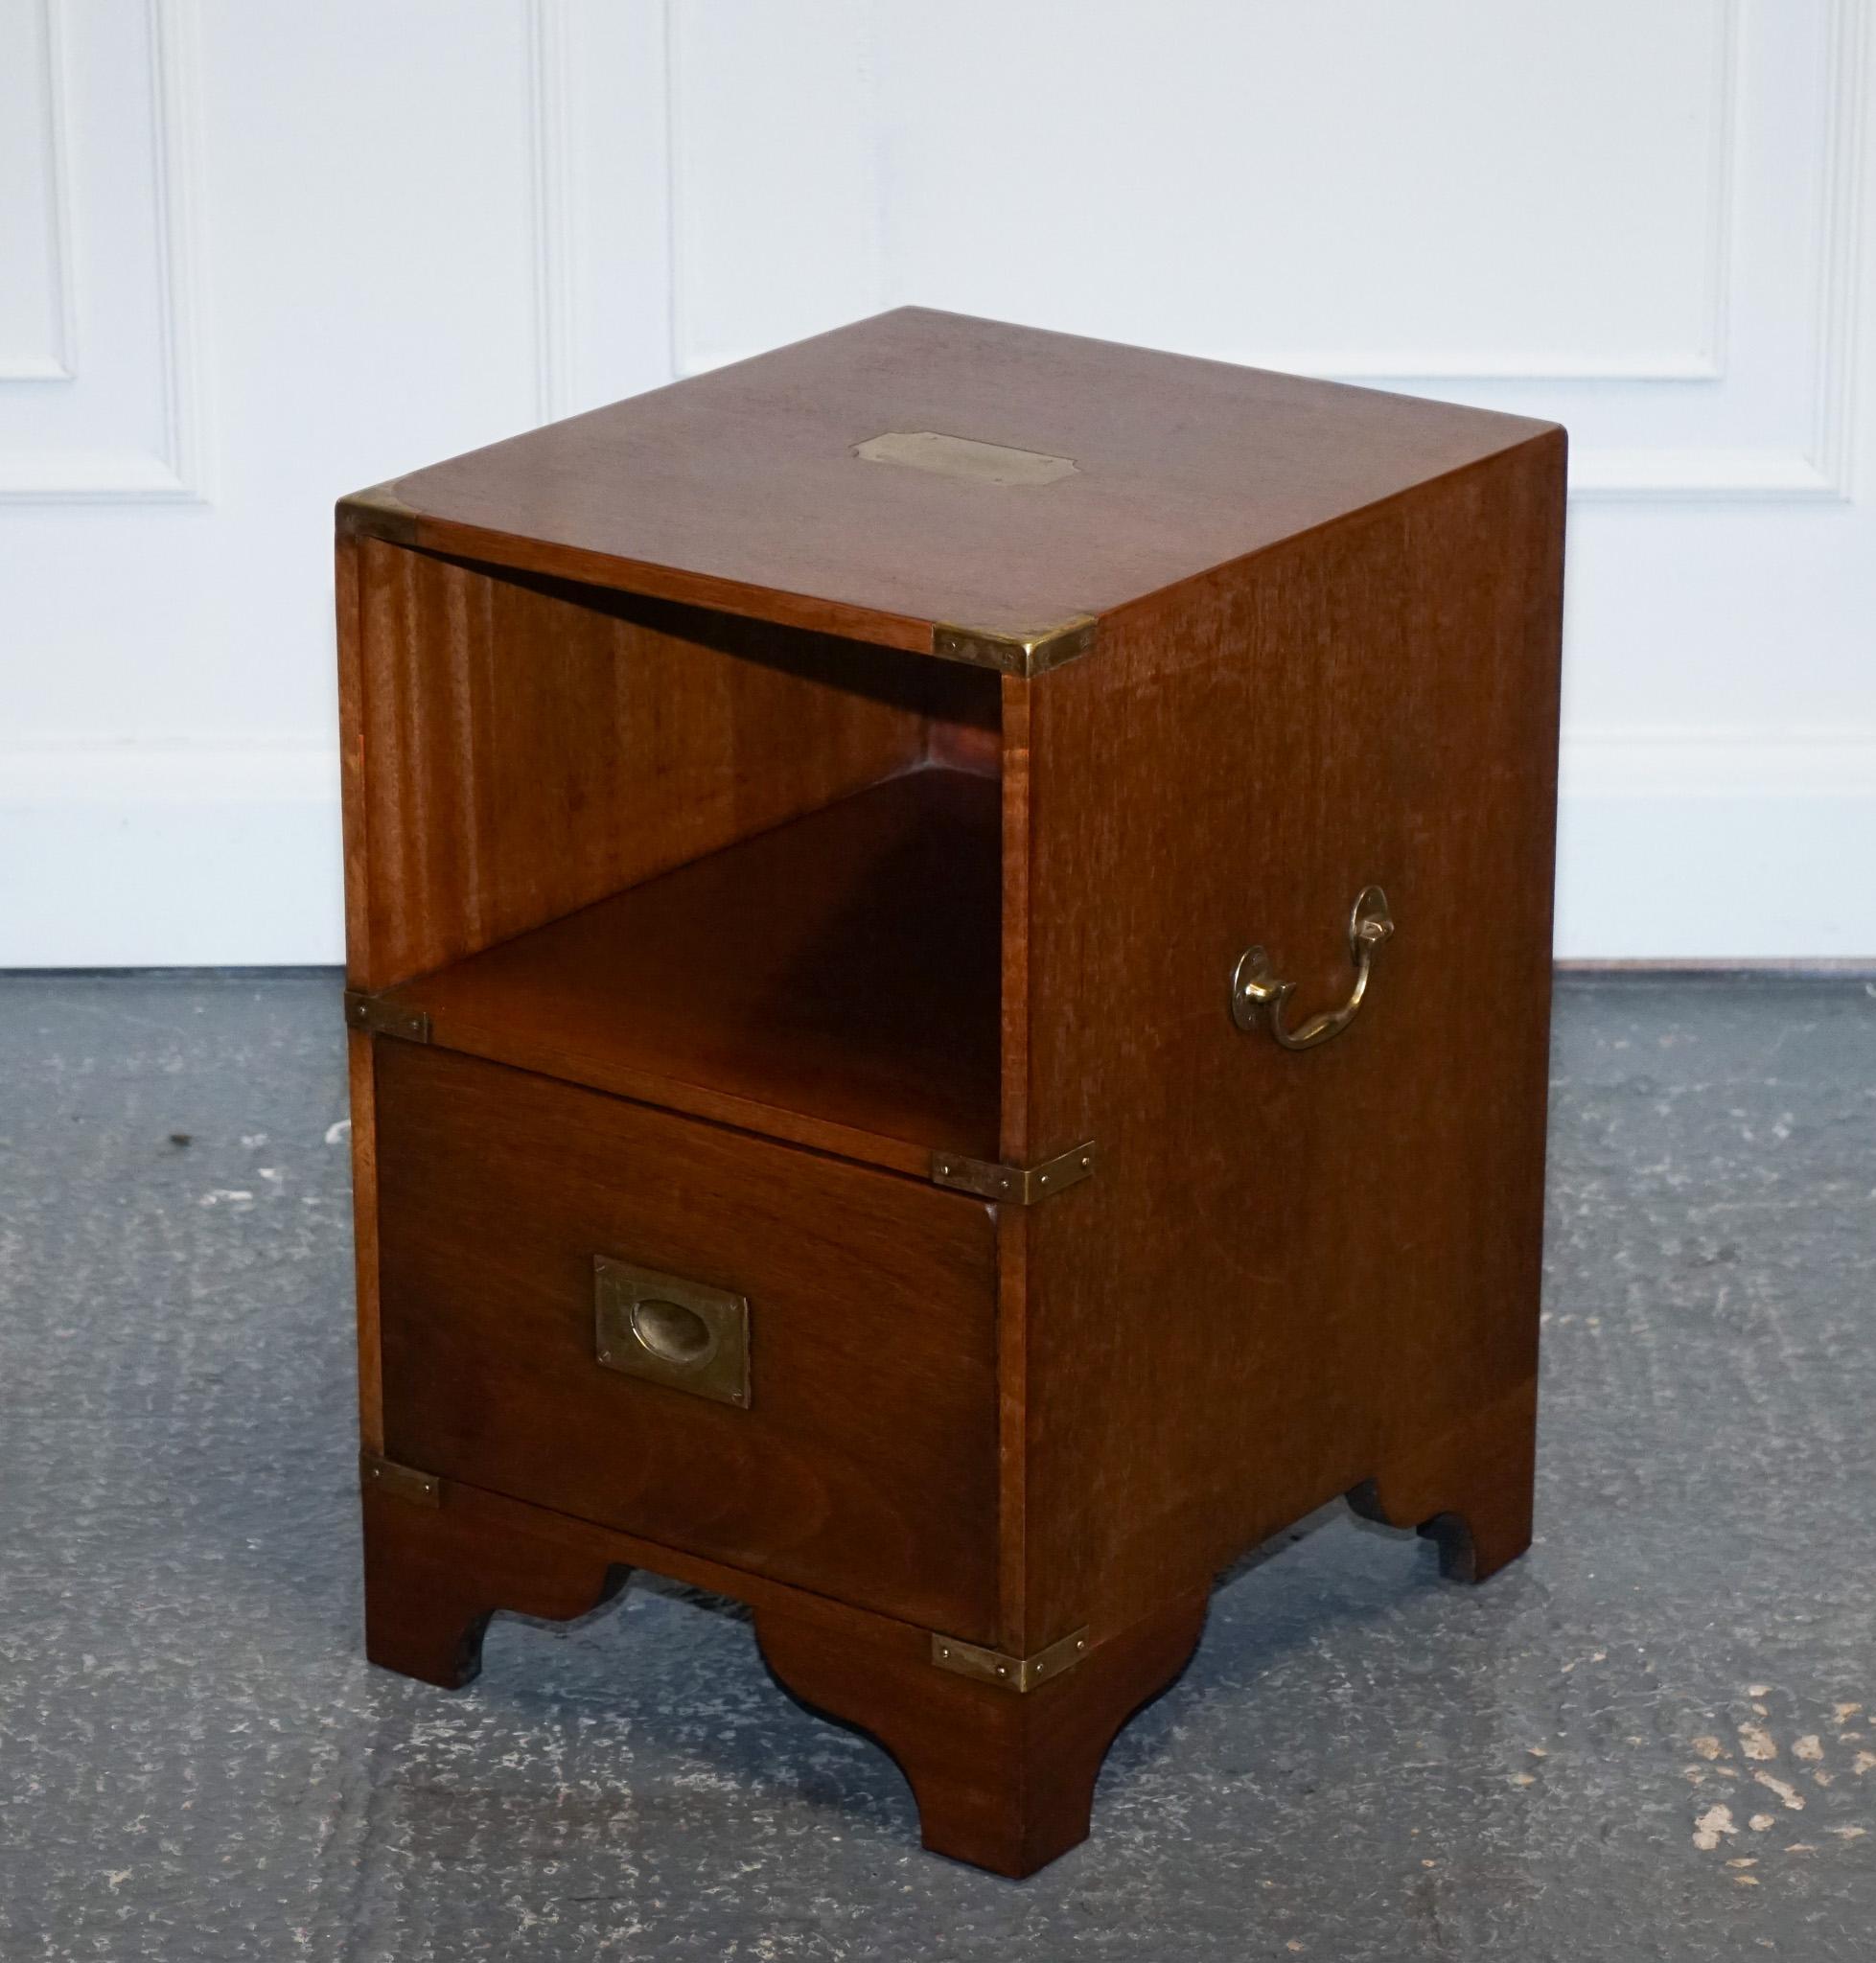 
We are delighted to offer for sale this Stunning Harrods Kennedy Furniture Campaign Side Table. 

Made by R.E.H Kennedy and retailed through Harrods London, a beautiful and well-made table. Inspired by Kennedy's Popular military campaign style, and